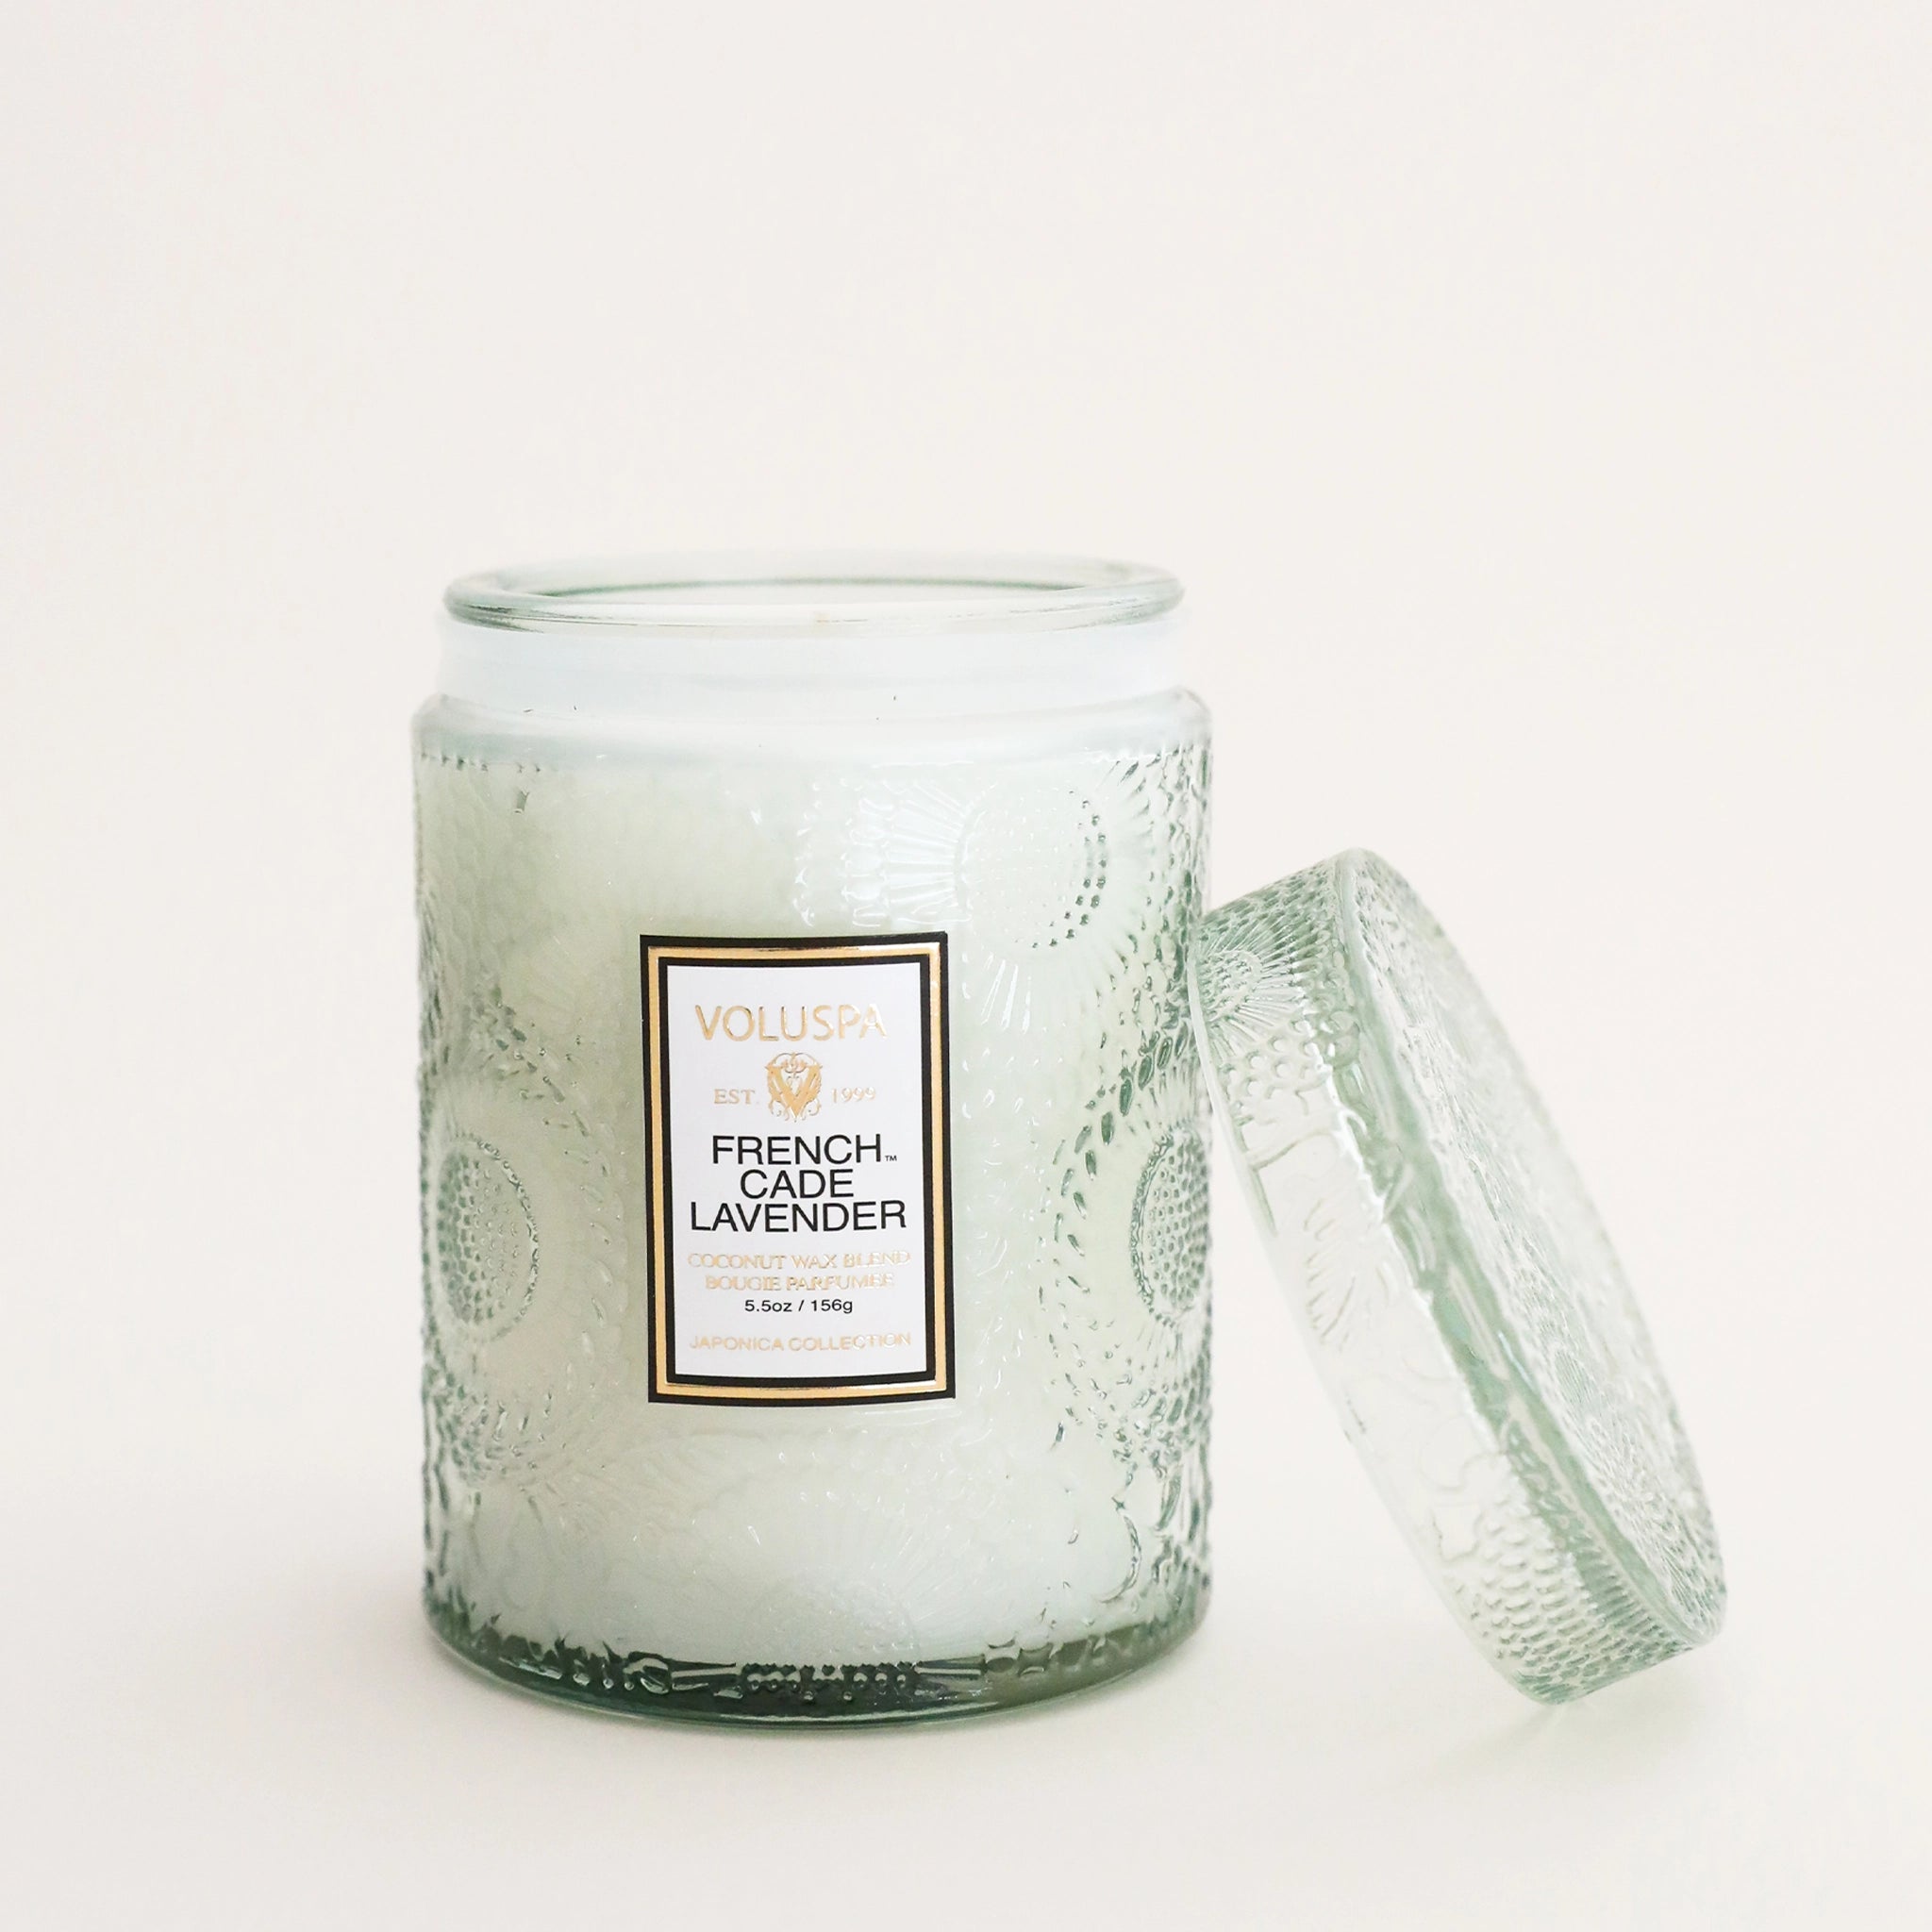 A light green decorative glass jar candle with a white rectangular label that reads, "French Cade Lavender".